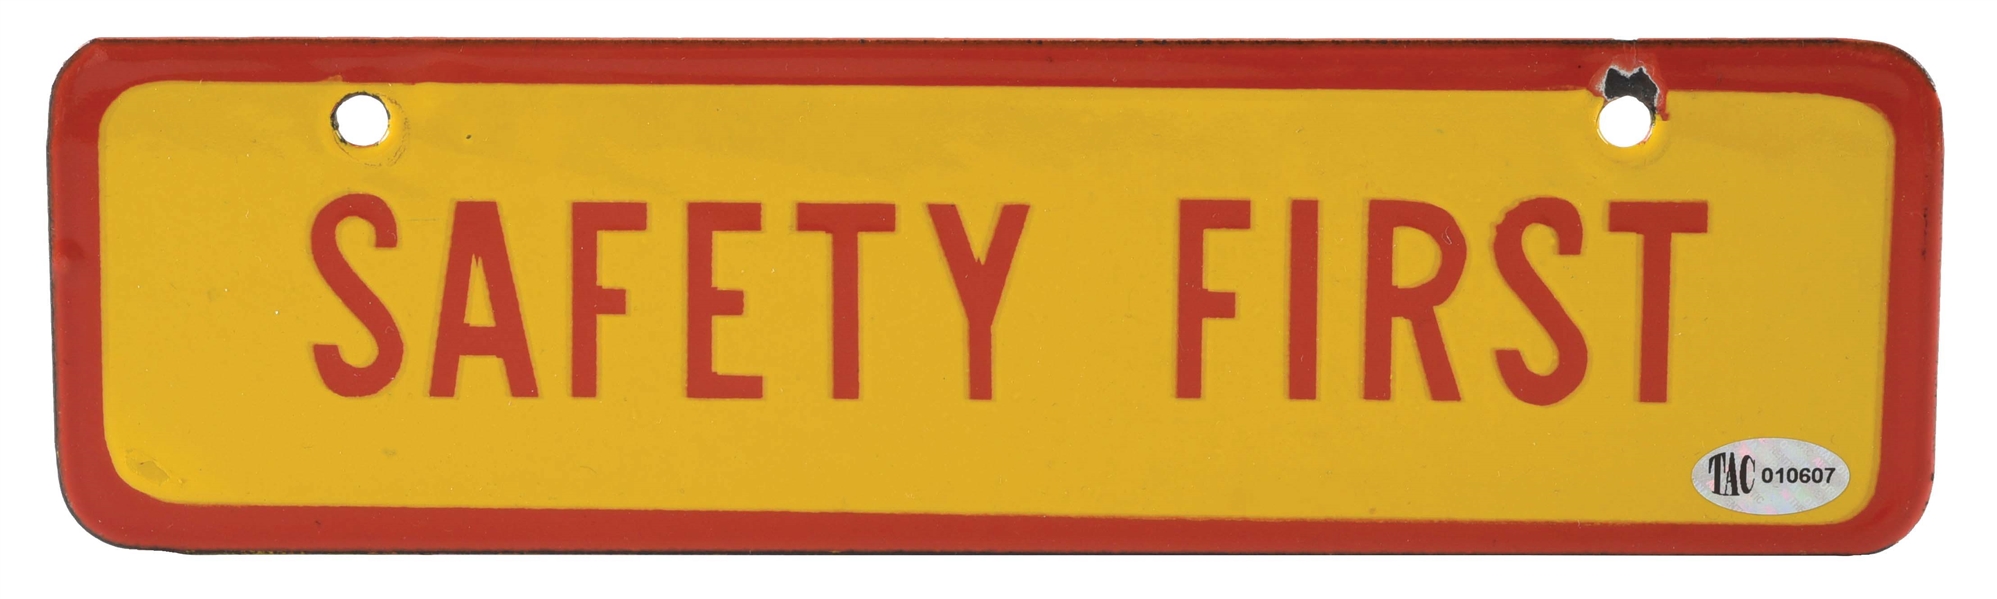 SHELL SAFETY FIRST PORCELAIN SERVICE STATION SIGN. 